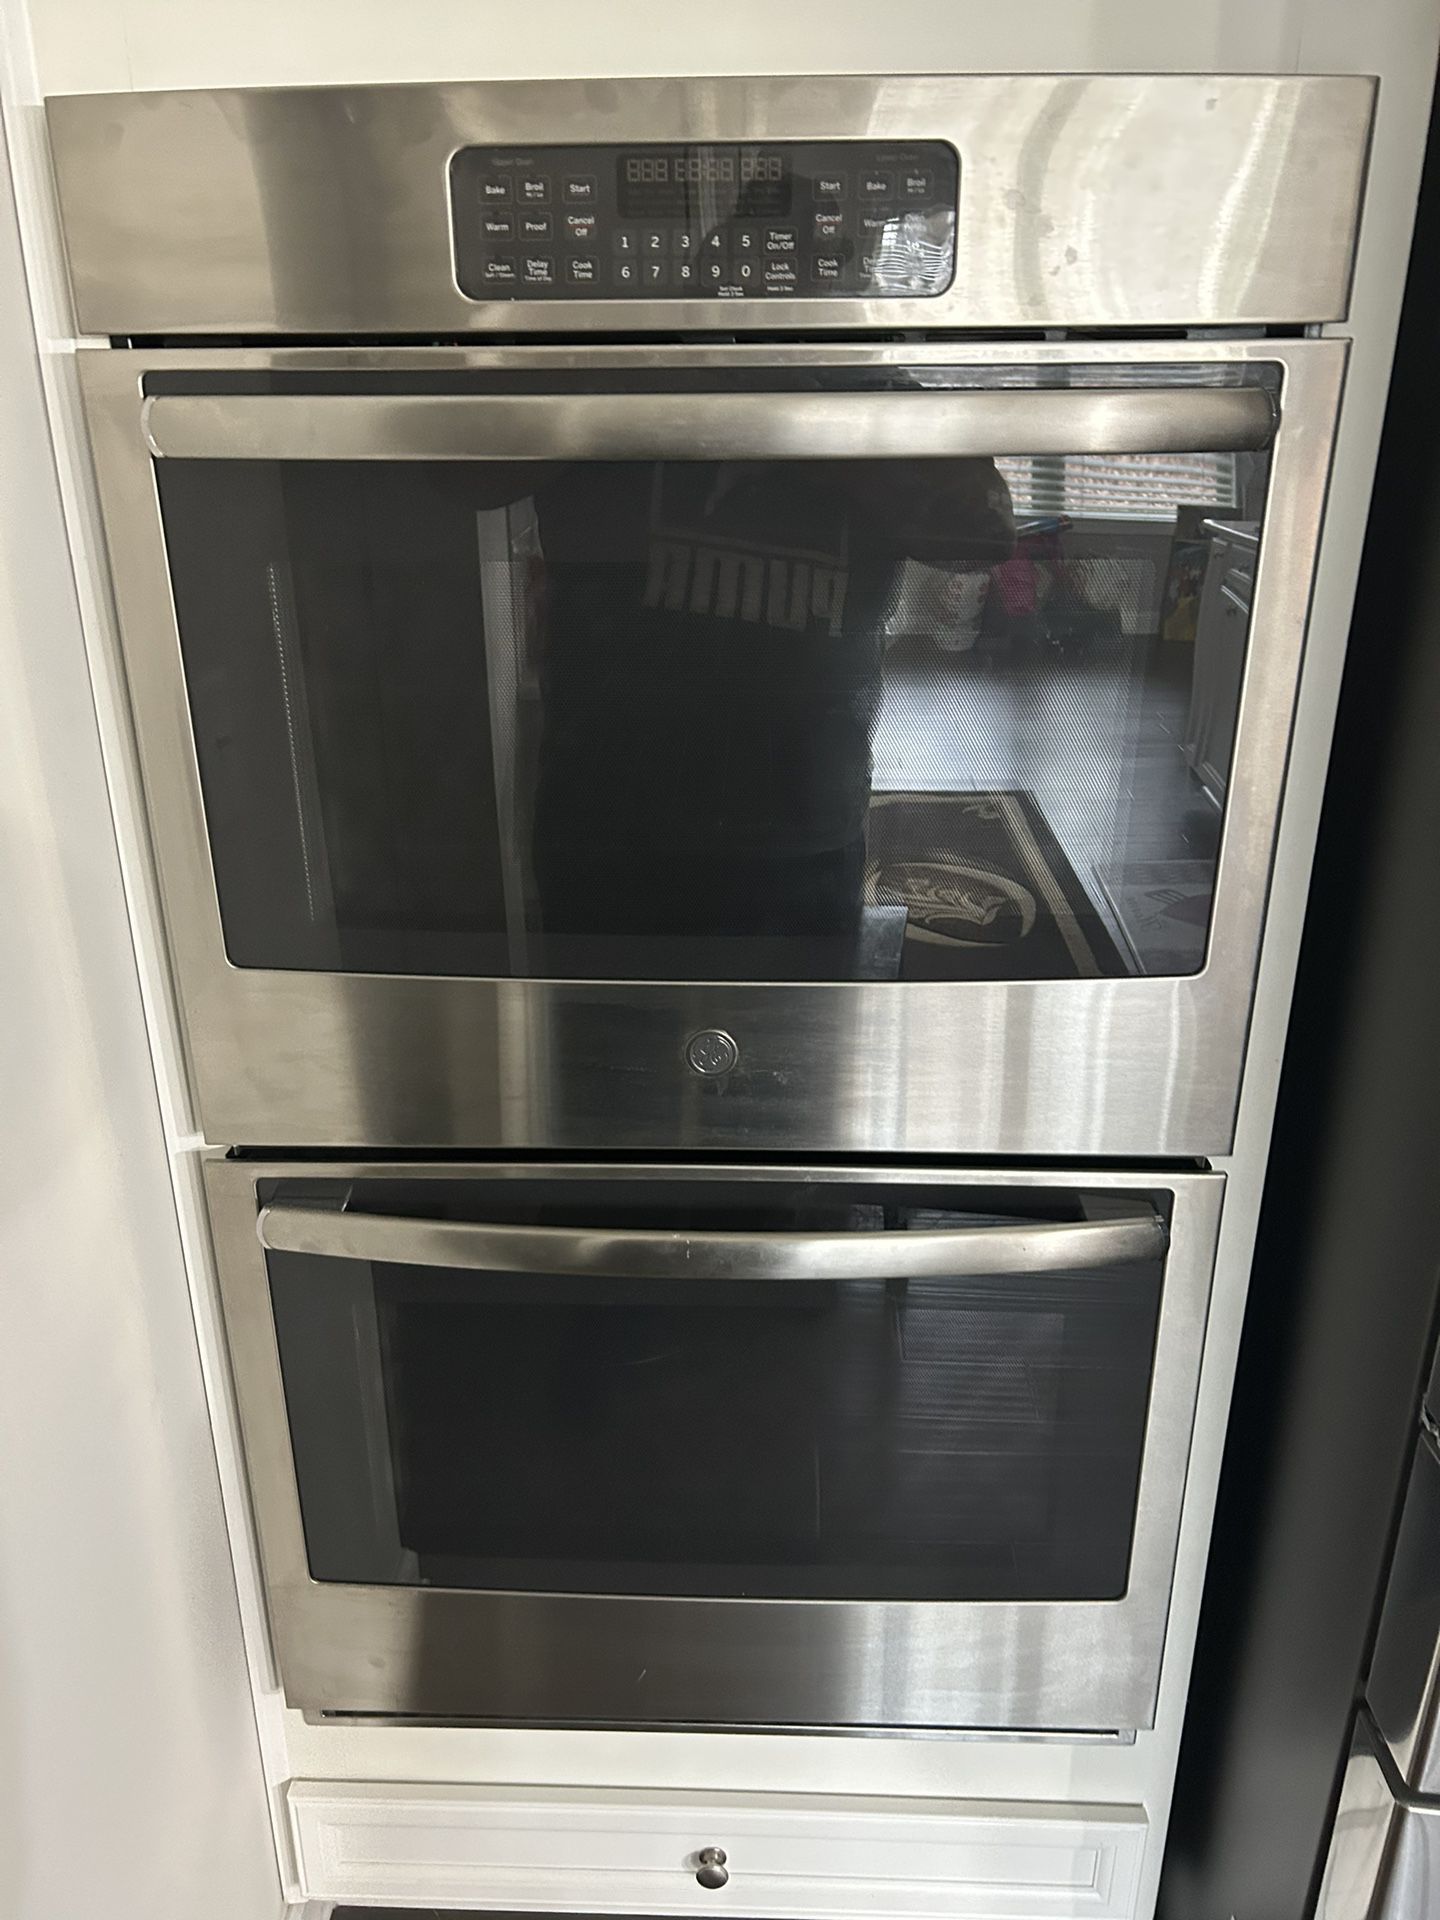 Bella Toaster Oven for Sale in Cumming, GA - OfferUp